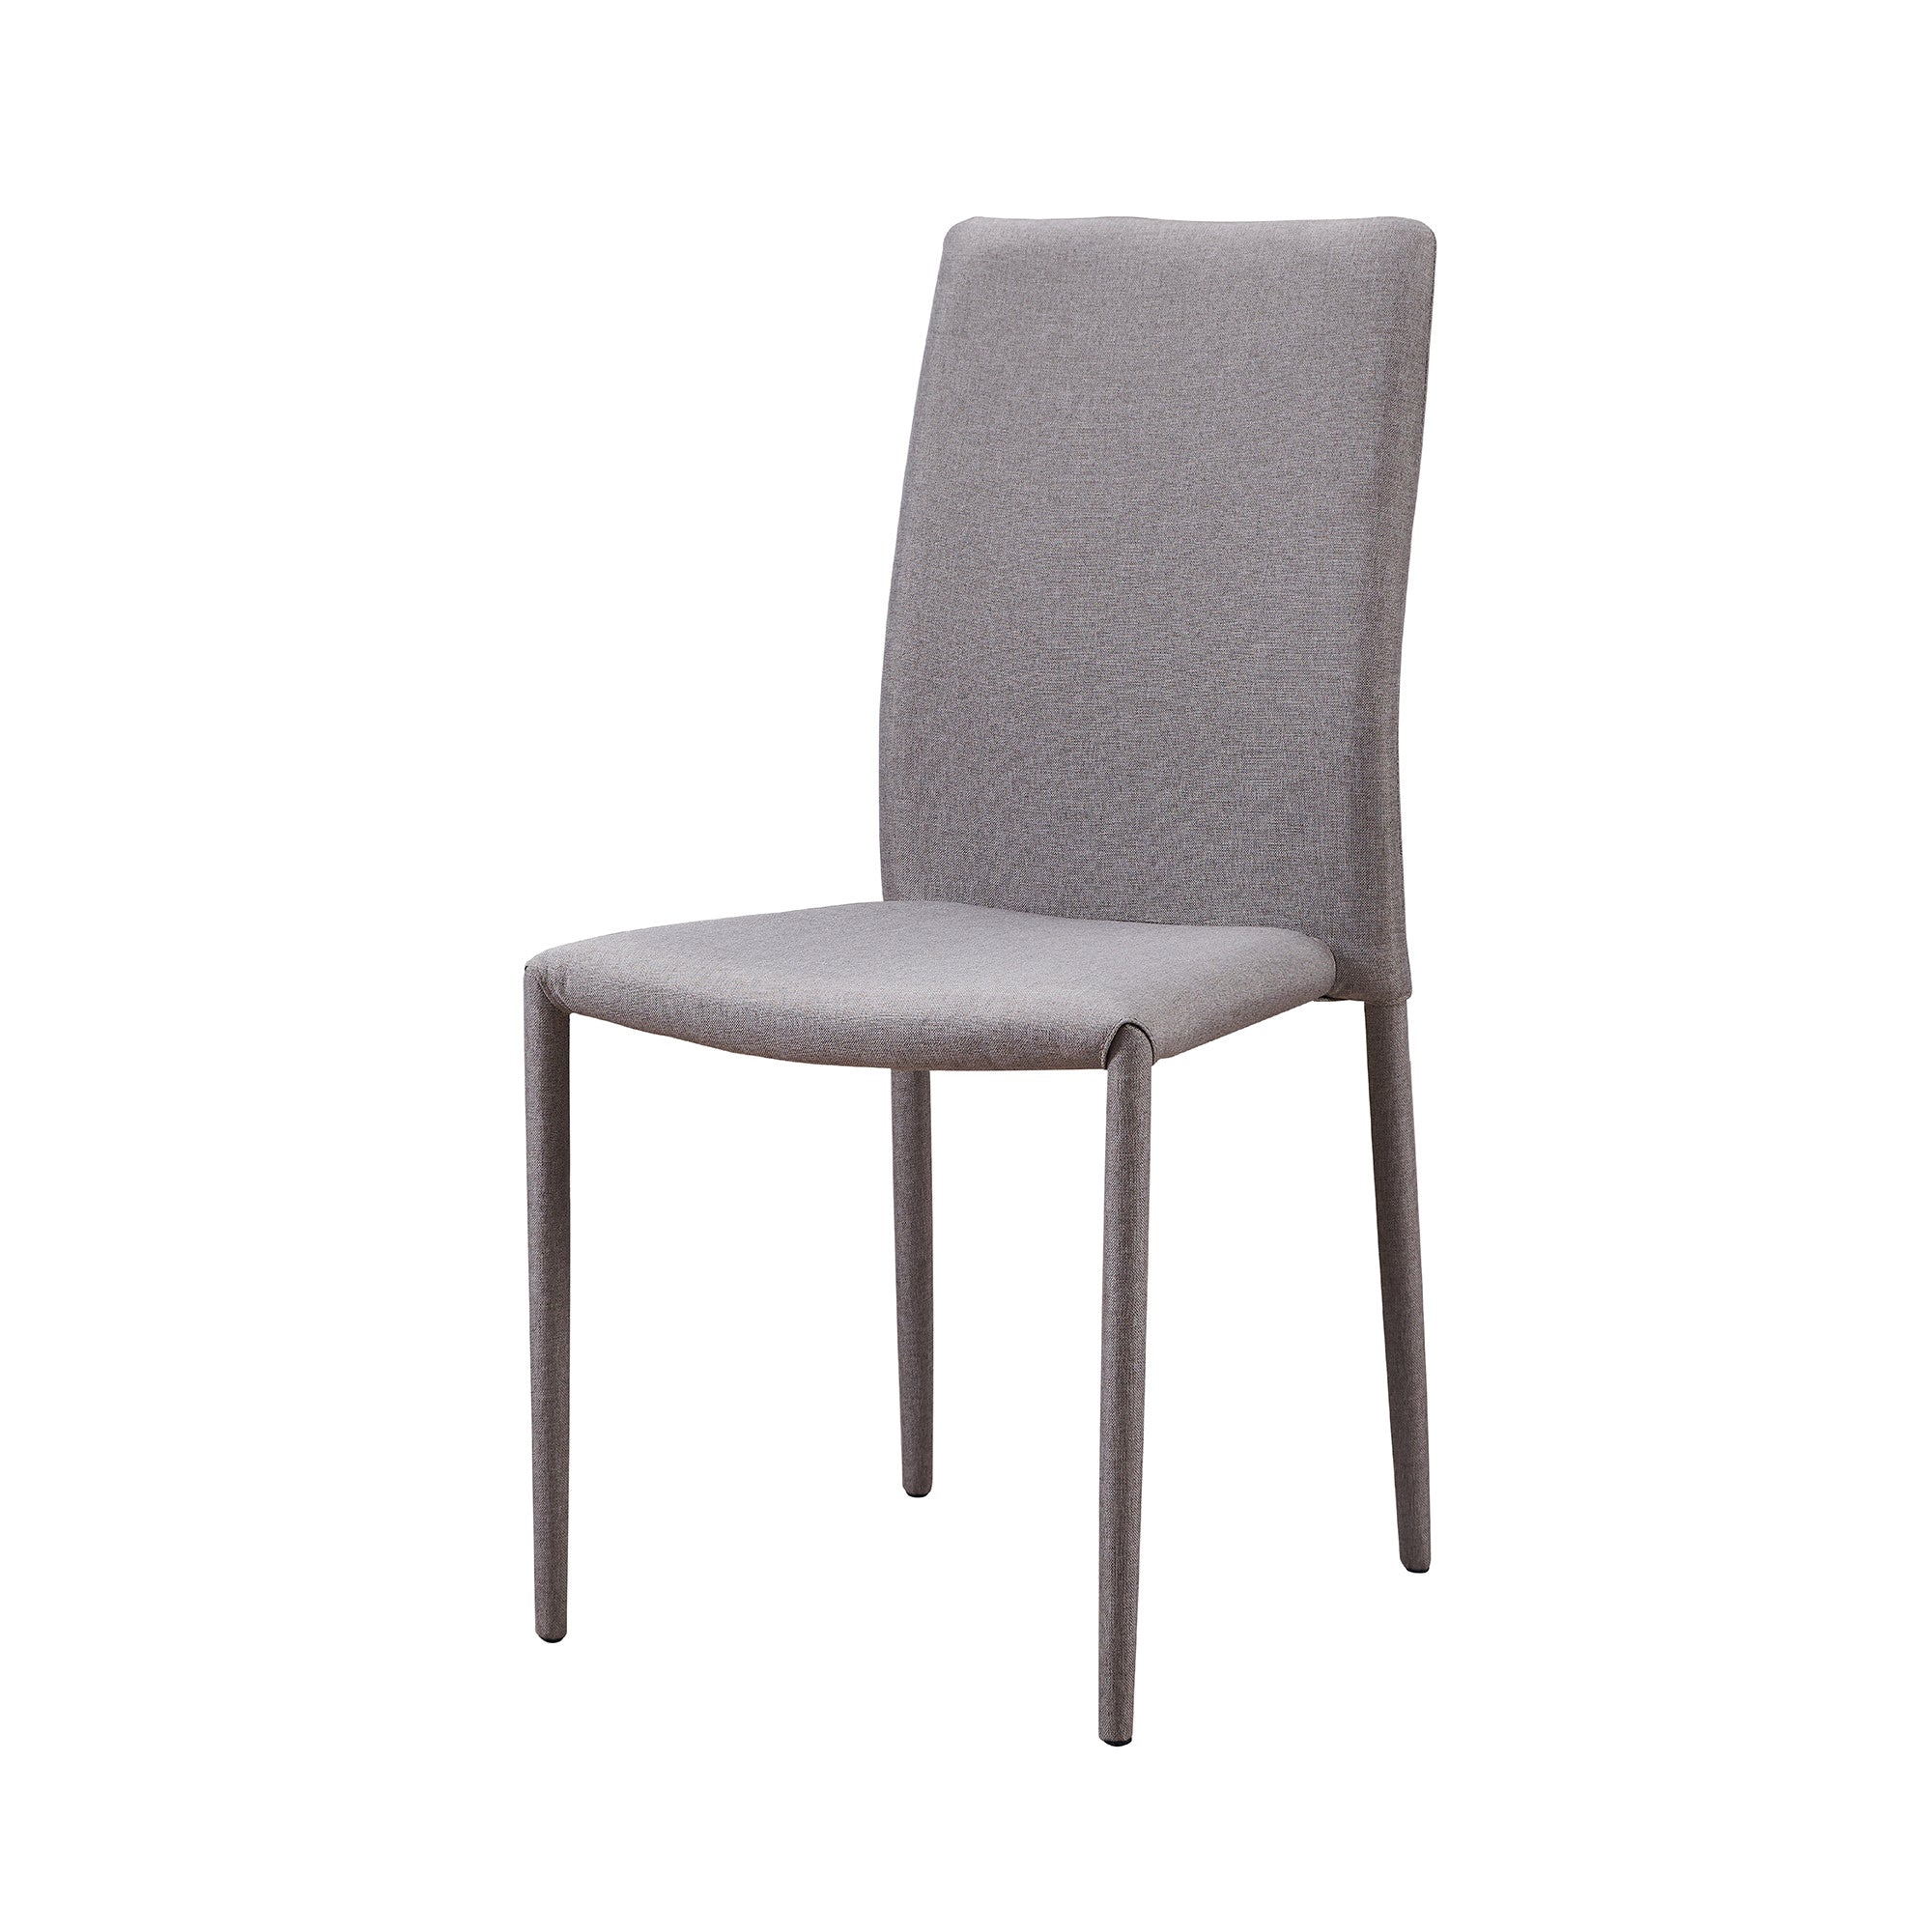 Teamson Home Fabric Dining Chair with Metal Legs, Set of 2, Light Gray